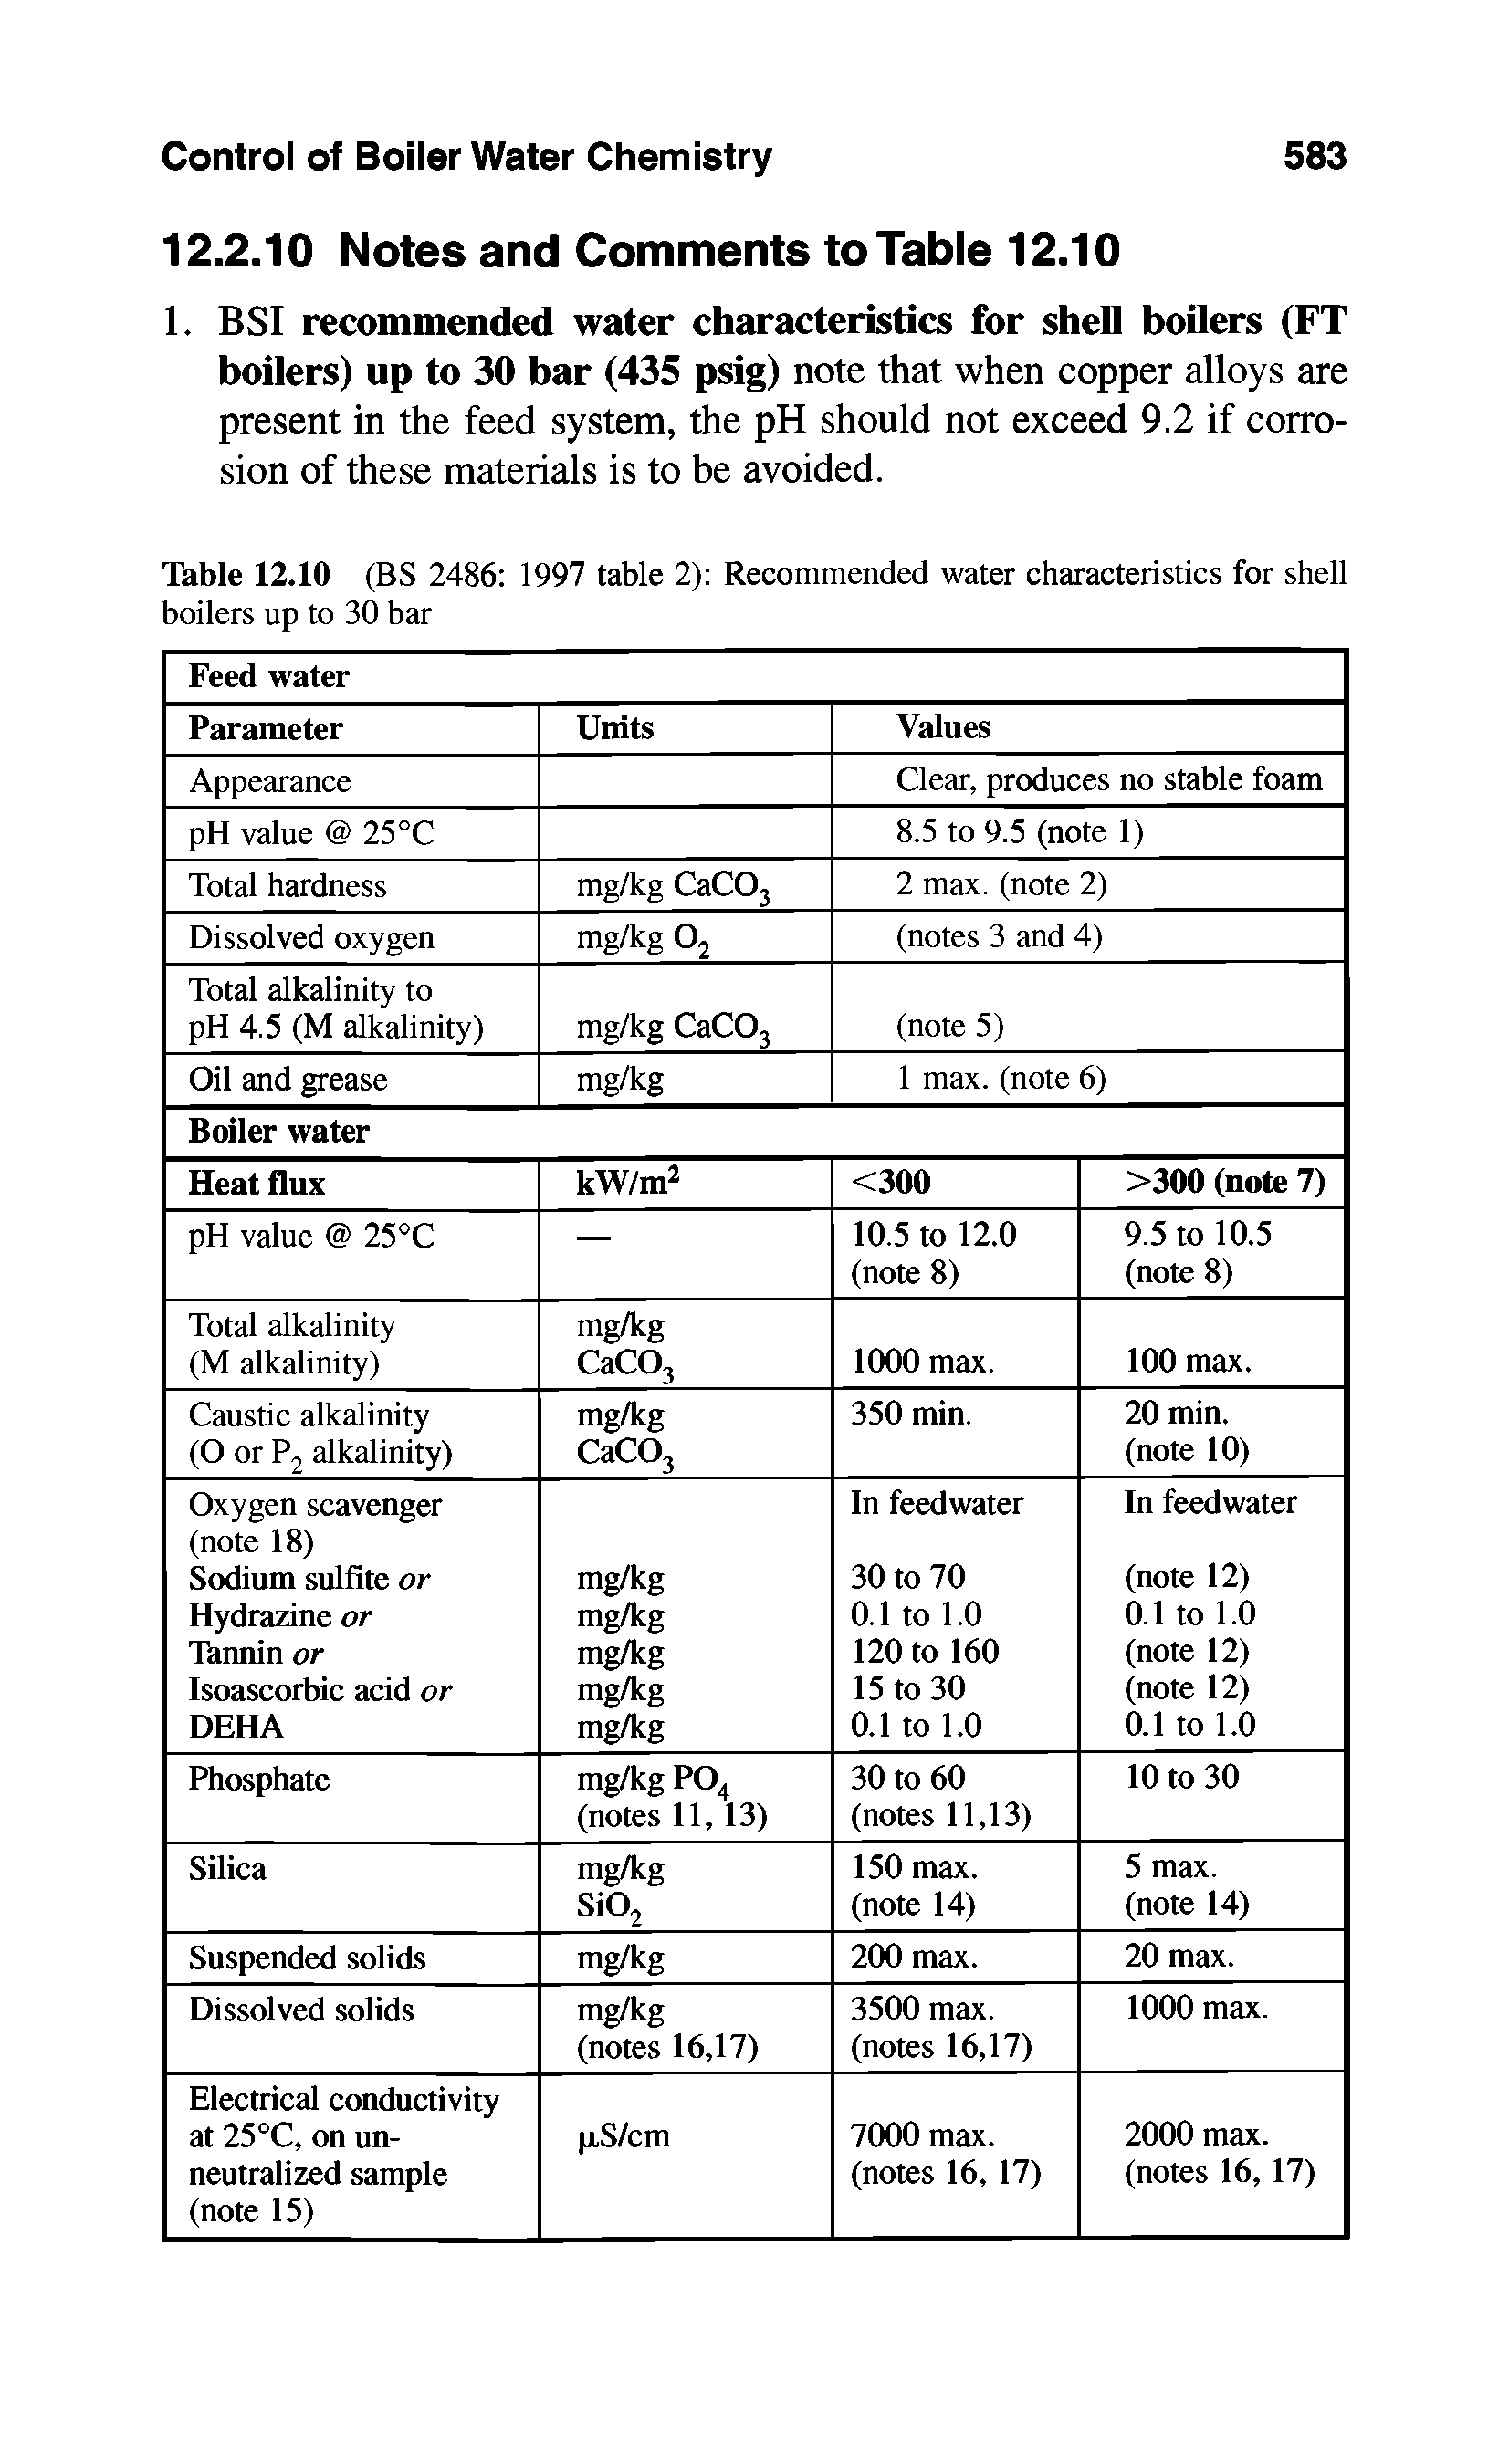 Table 12.10 (BS 2486 1997 table 2) Recommended water characteristics for shell boilers up to 30 bar...